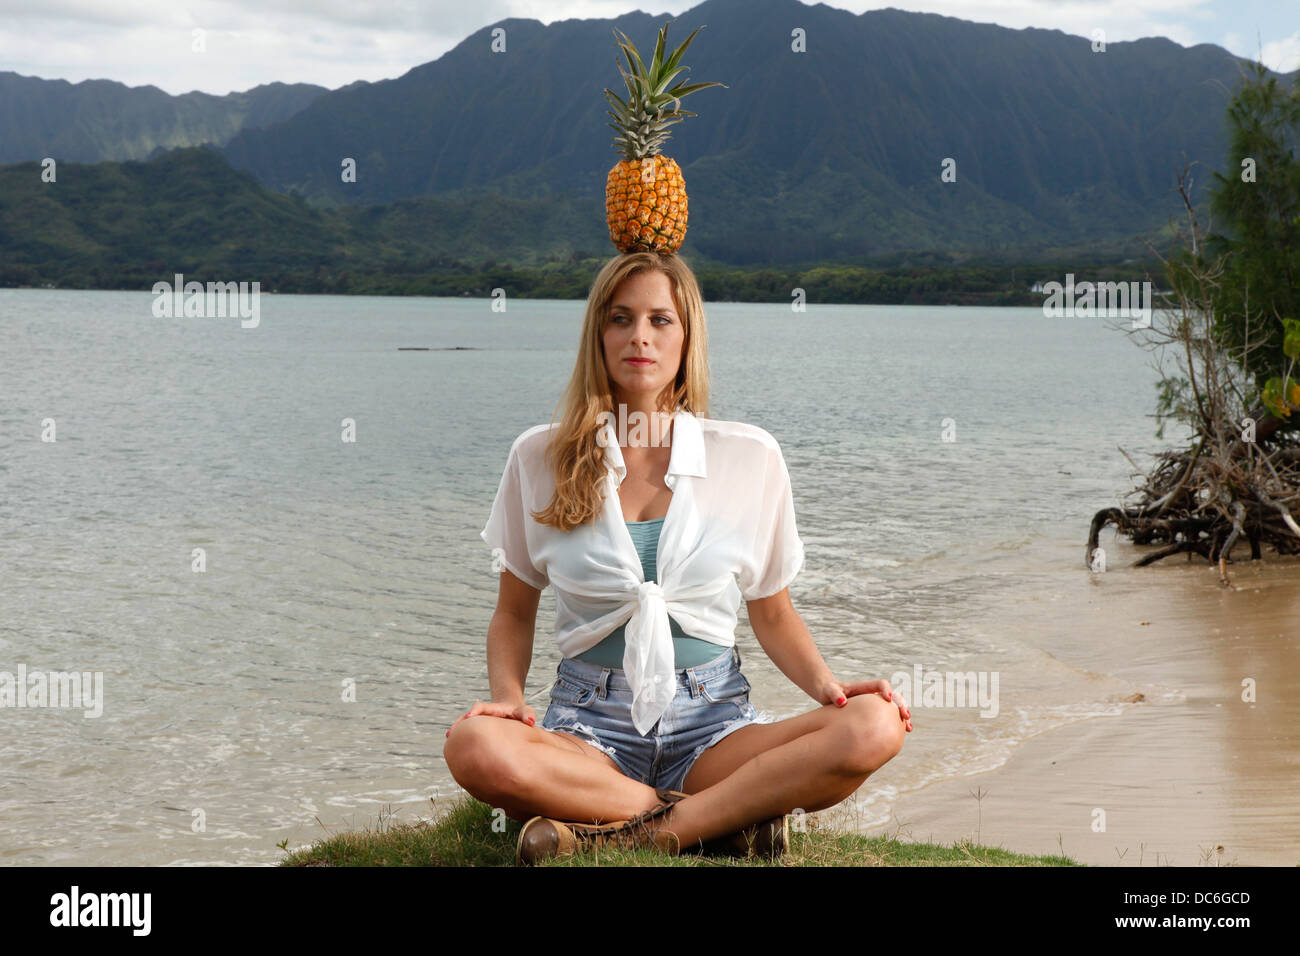 A young caucasian woman meditates with a pineapple balancing on top of her head in Honolulu, Hawaii. Stock Photo